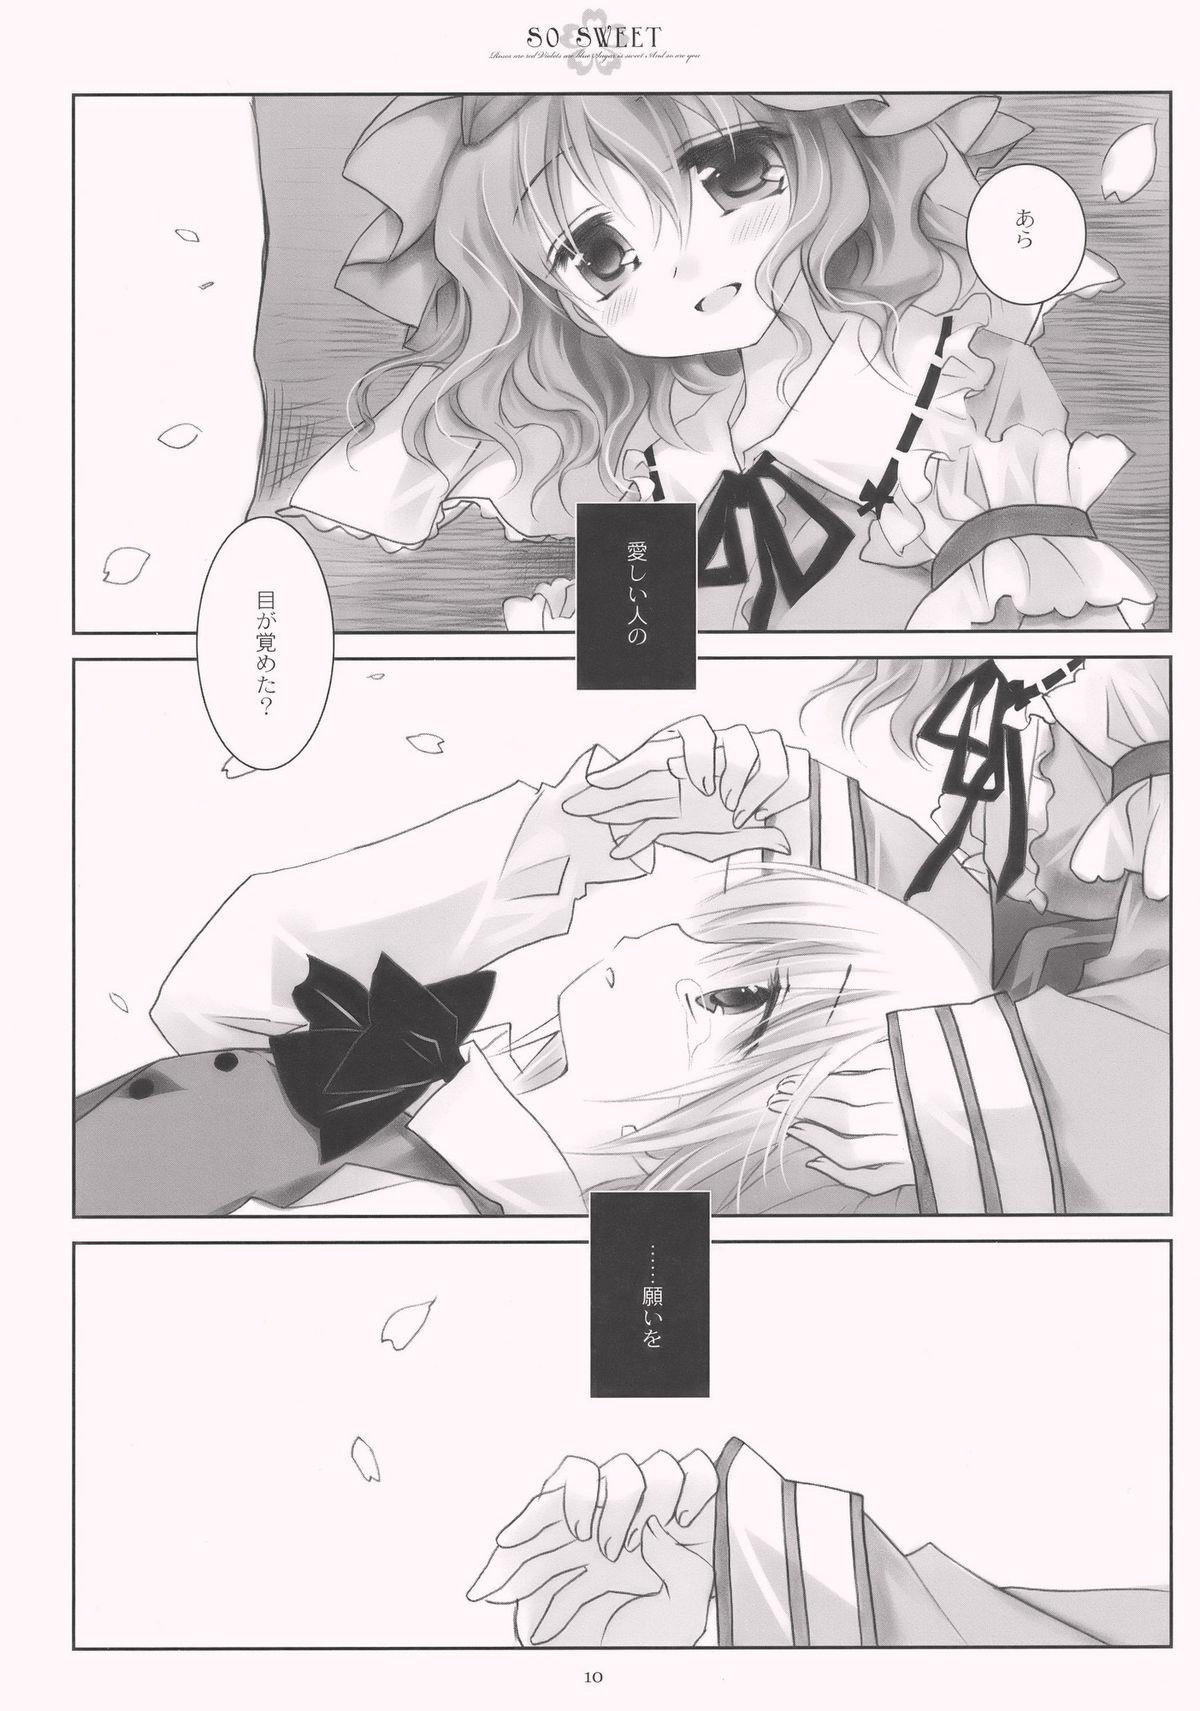 Hot SO SWEET - Touhou project Rebolando - Page 10